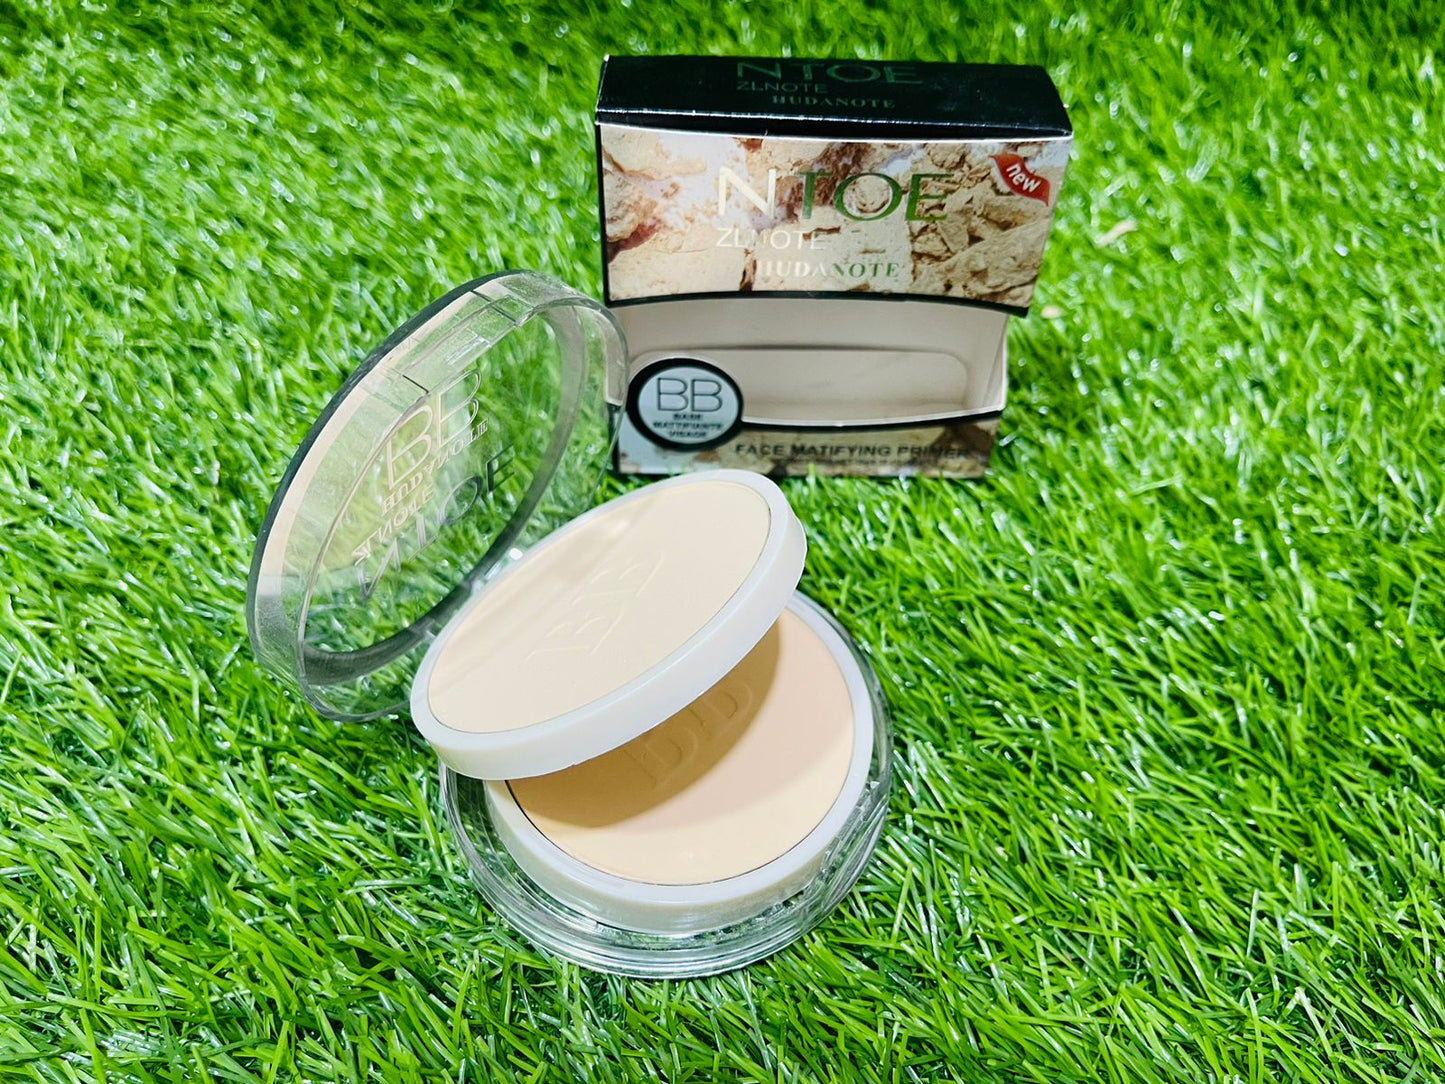 NOTE  BB COMPACT TWIN CAKE FACE POWDER